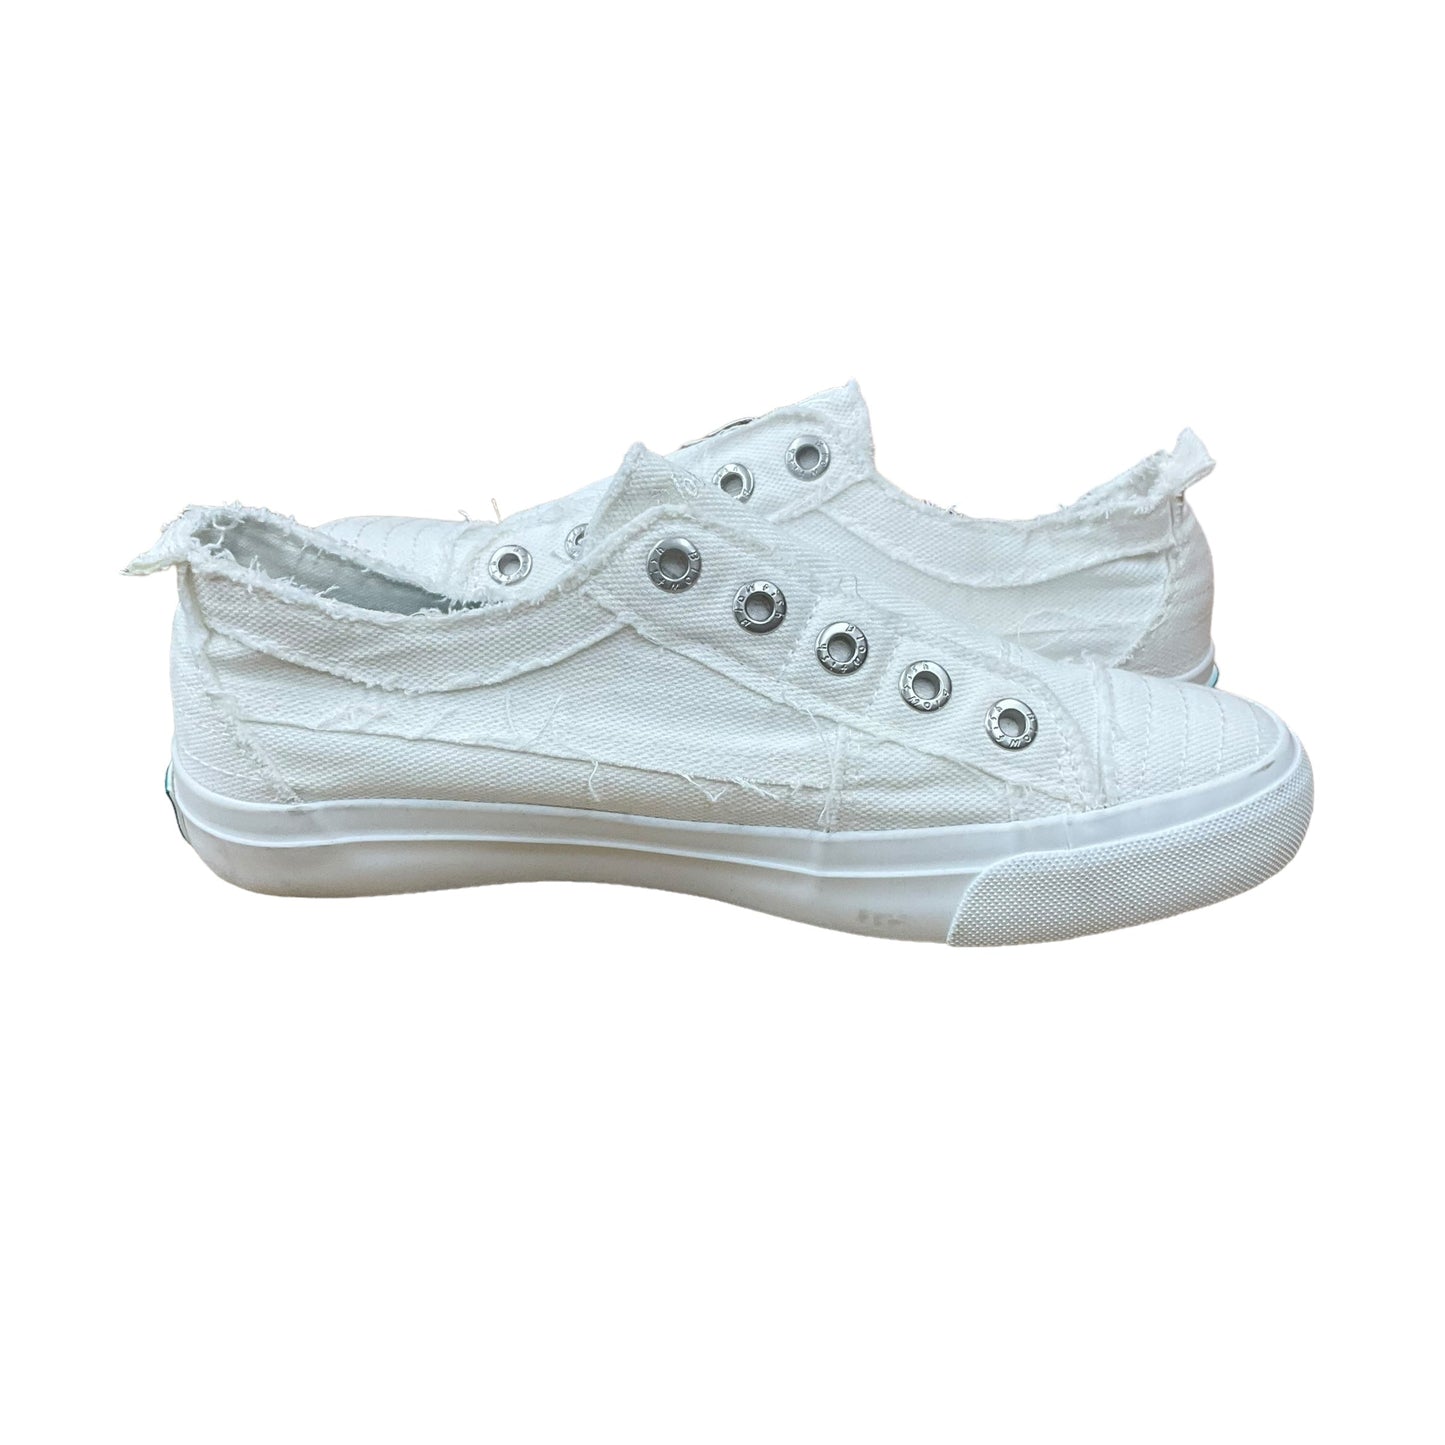 White Shoes Sneakers Blowfish, Size 8.5